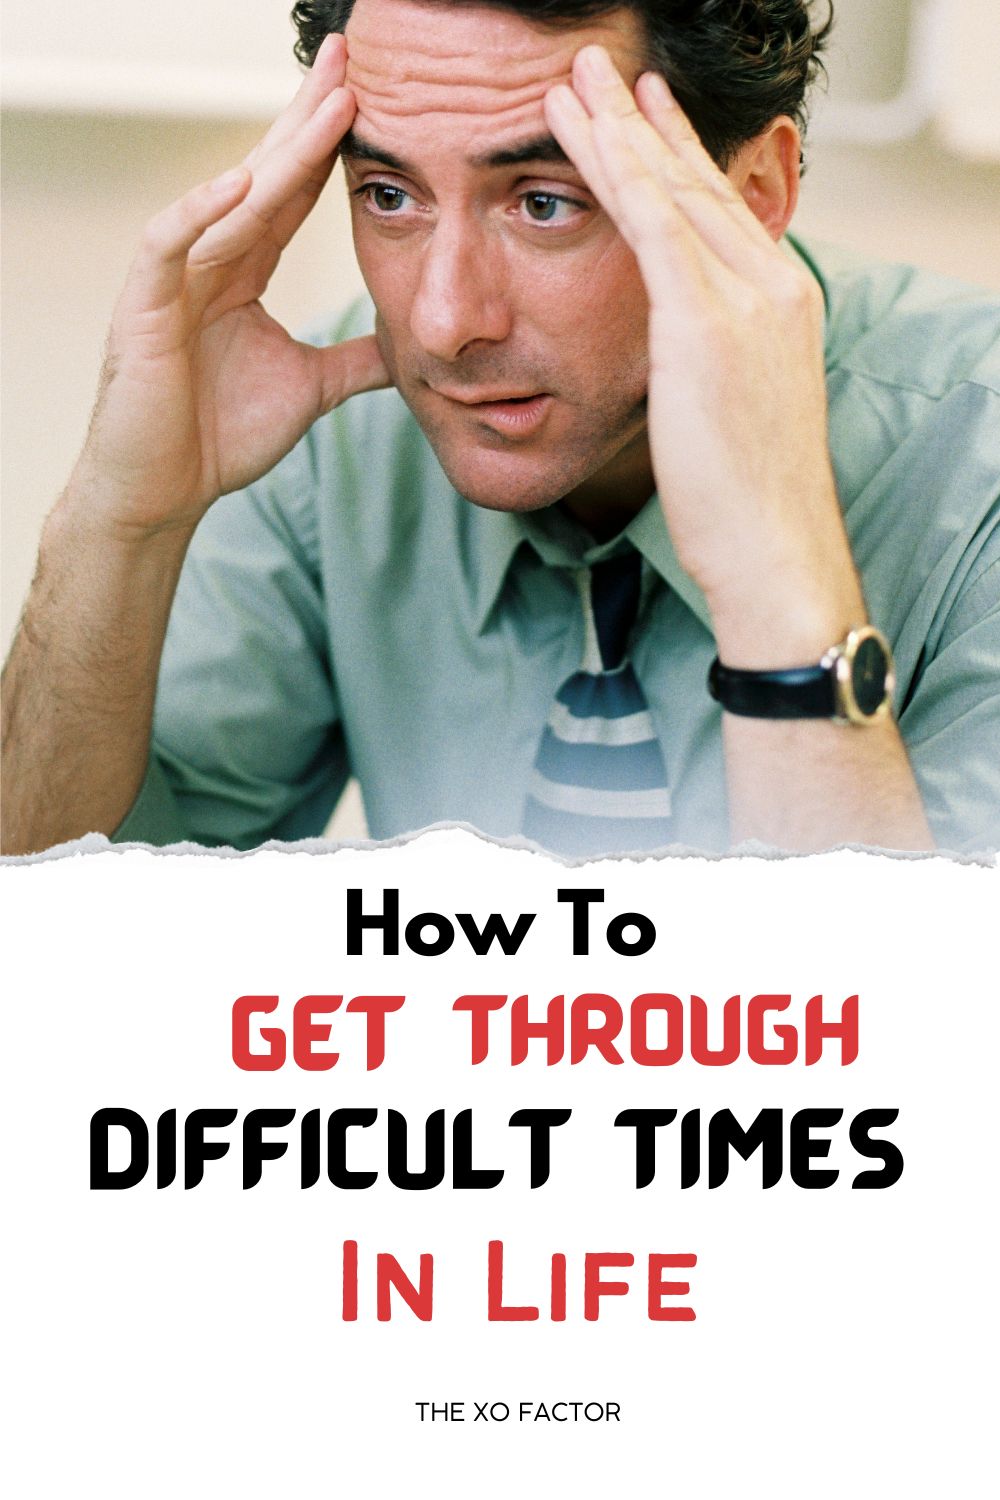 How To Get Through Difficult Times In Life